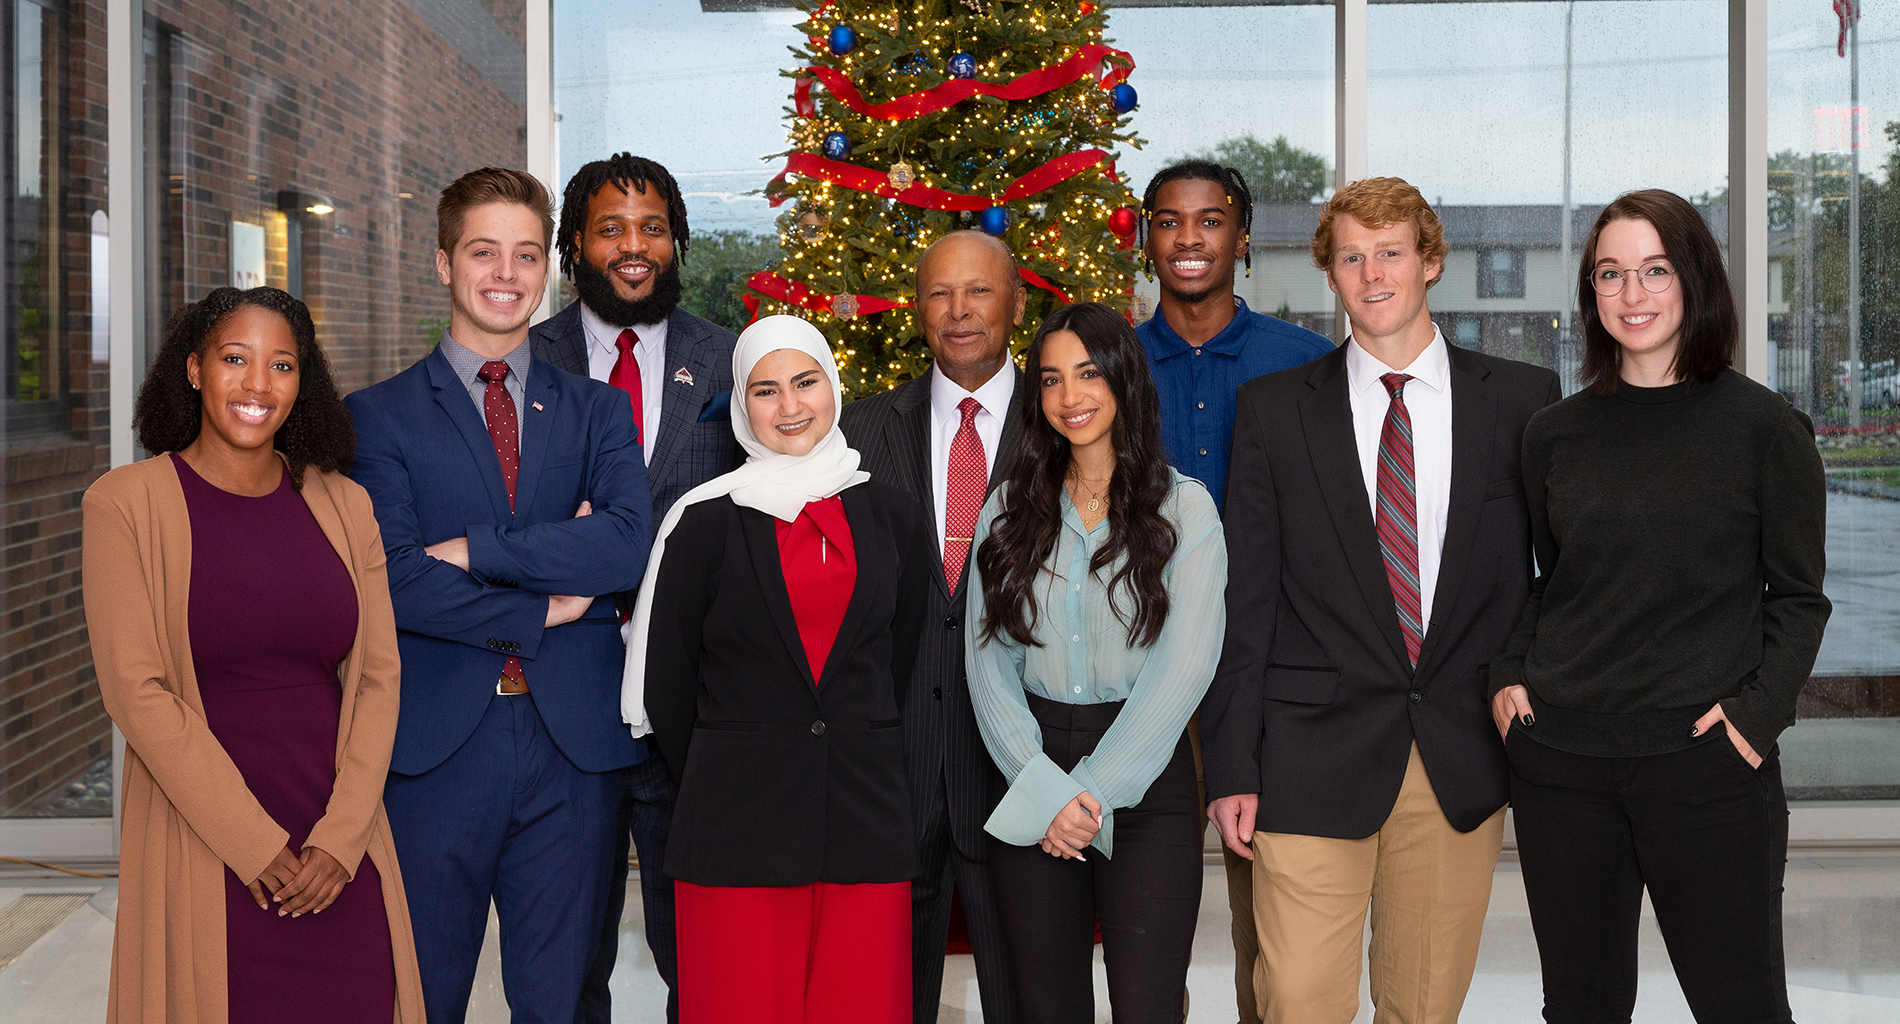 Detroit Mercy's Christmas card photo, featuring President Antoine M. Garibaldi and several students posing in front of a Christmas tree.